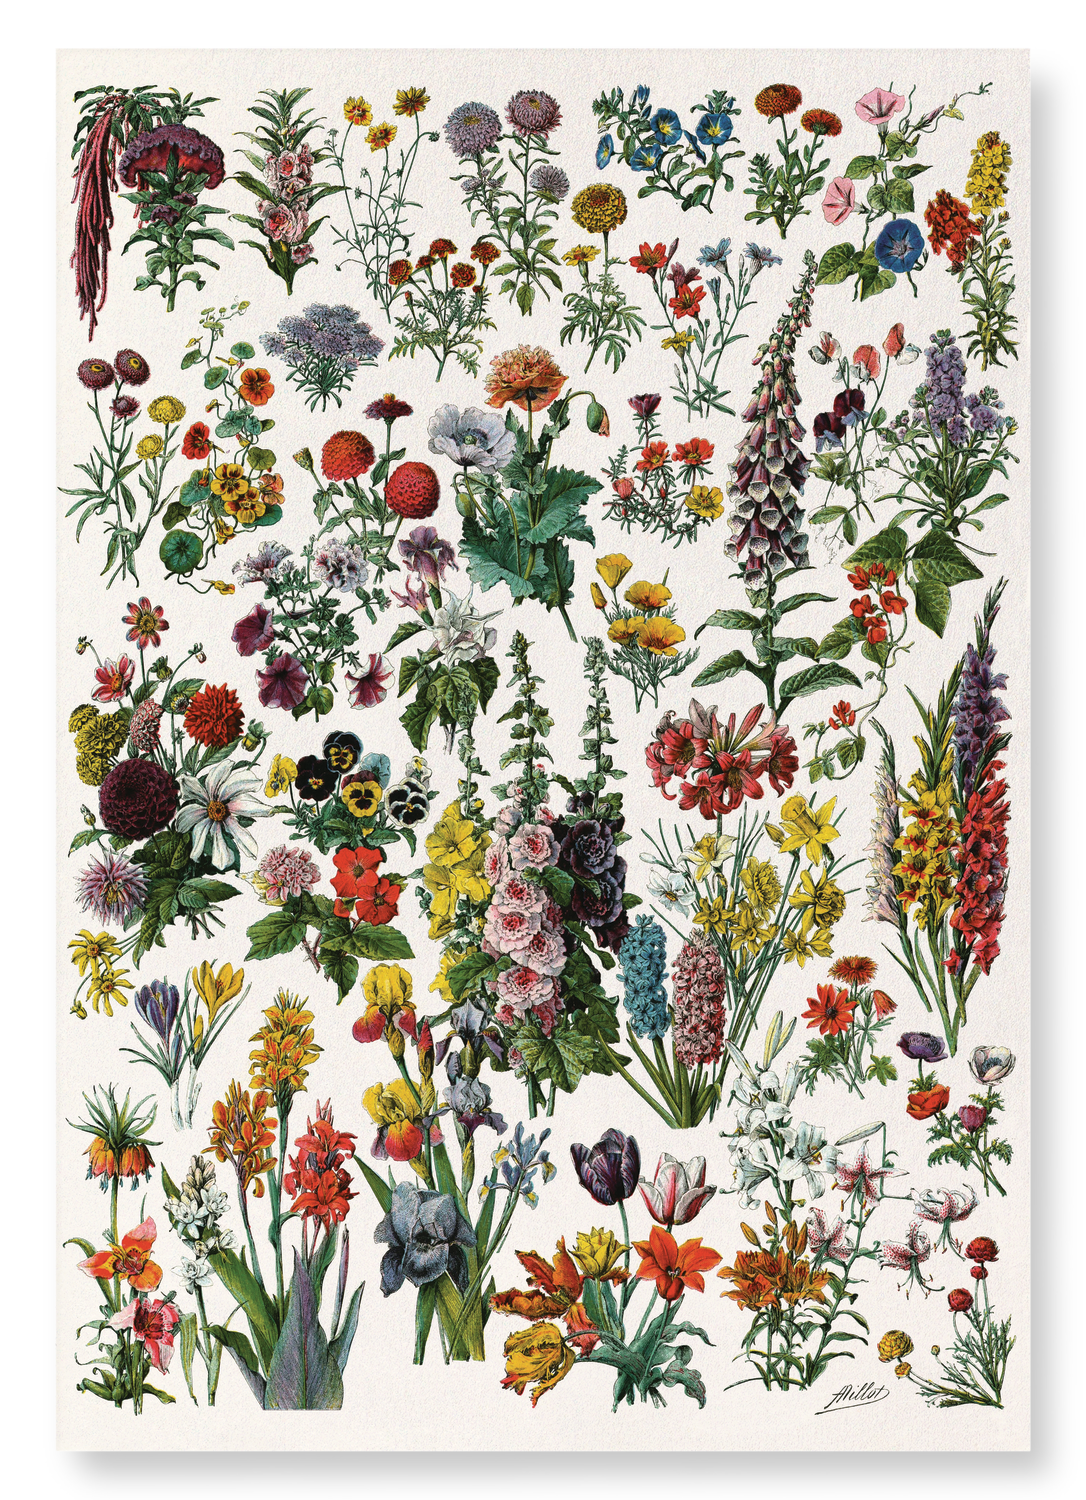 ILLUSTRATION OF FLOWERS - A (C.1900)